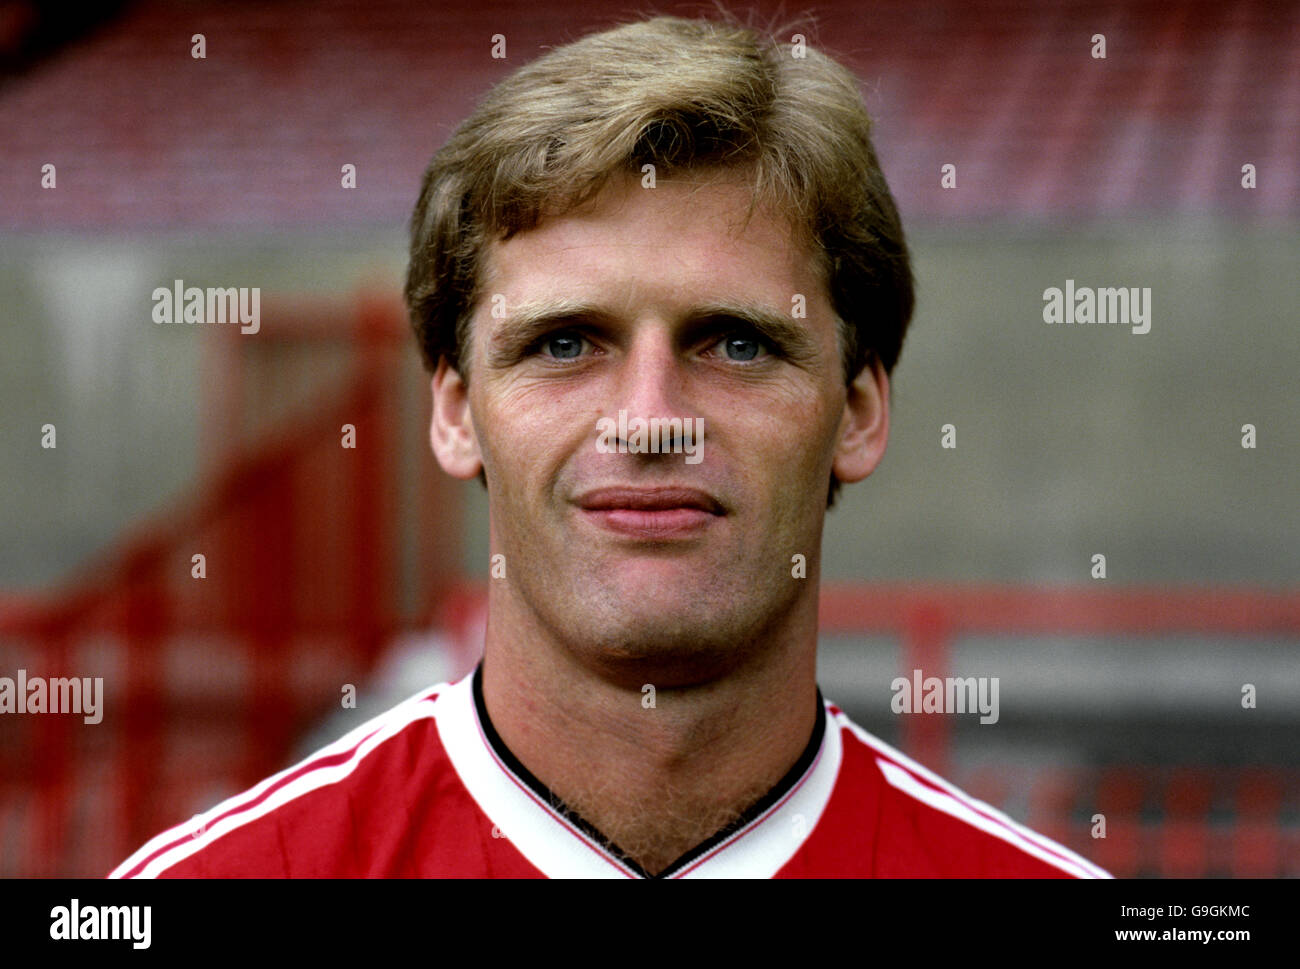 Soccer - Canon League Division One - Manchester United Photocall - Old Trafford. Gordon McQueen, Manchester United Stock Photo